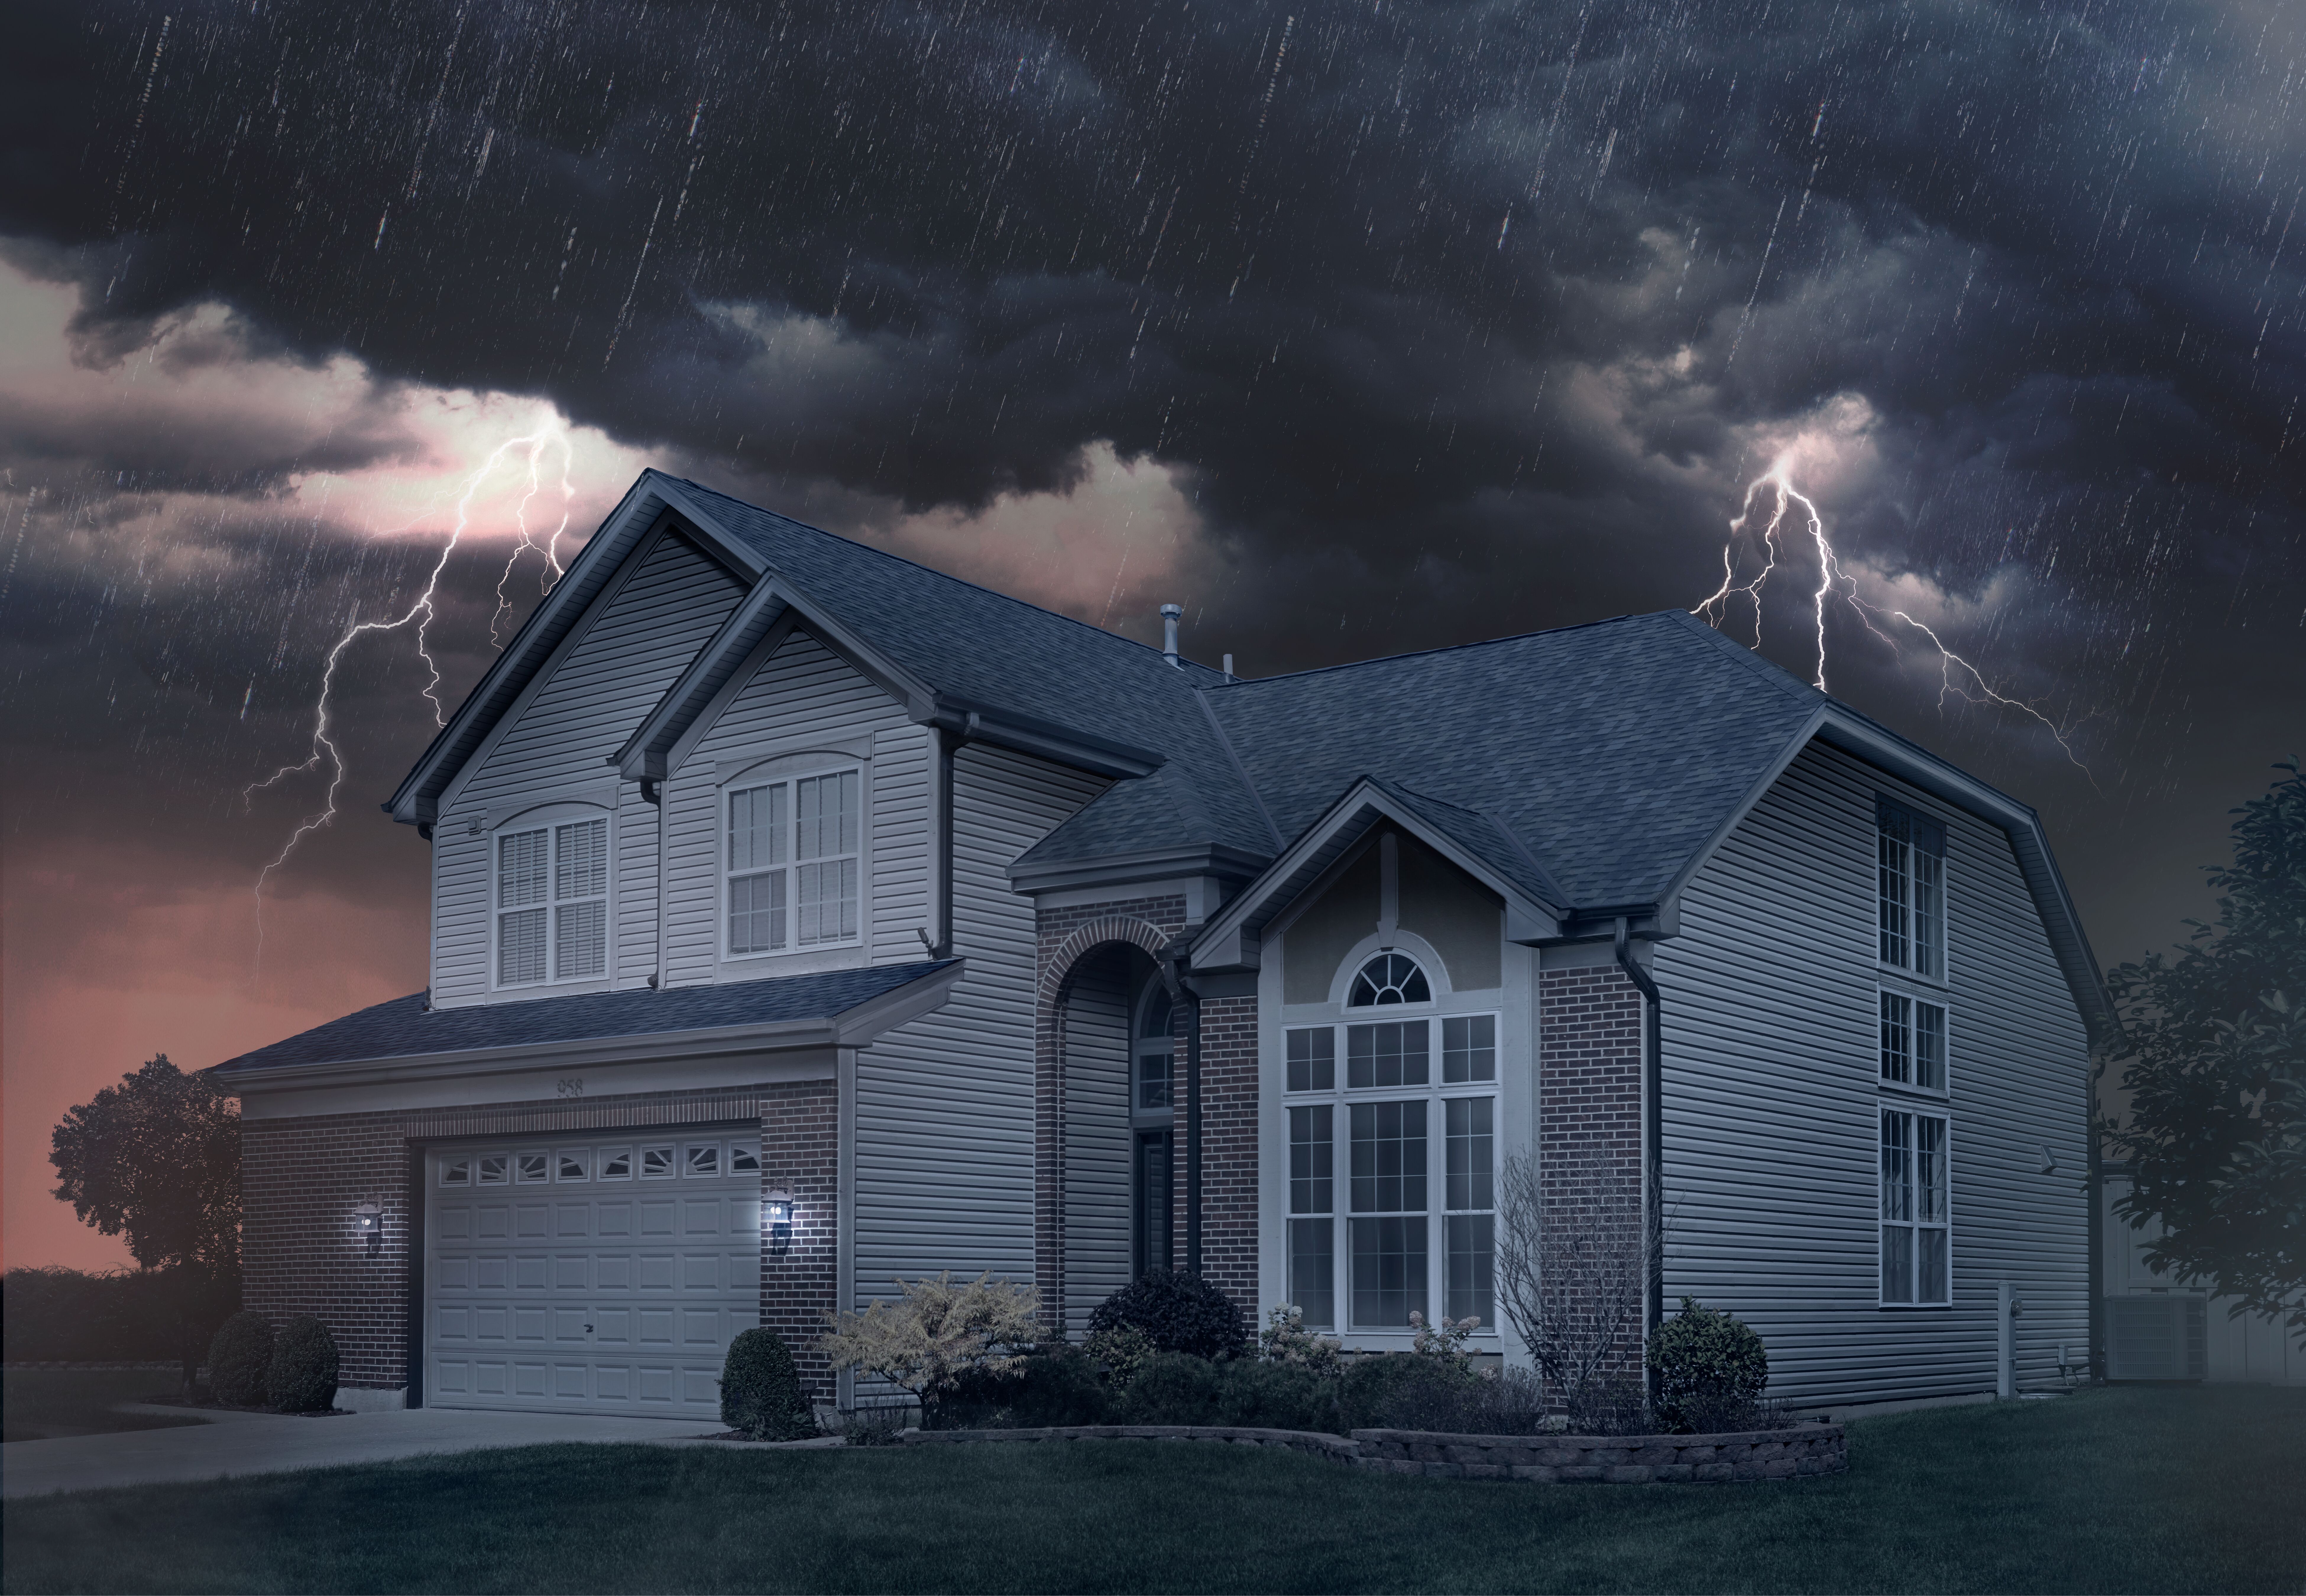 Home in thunderstorm